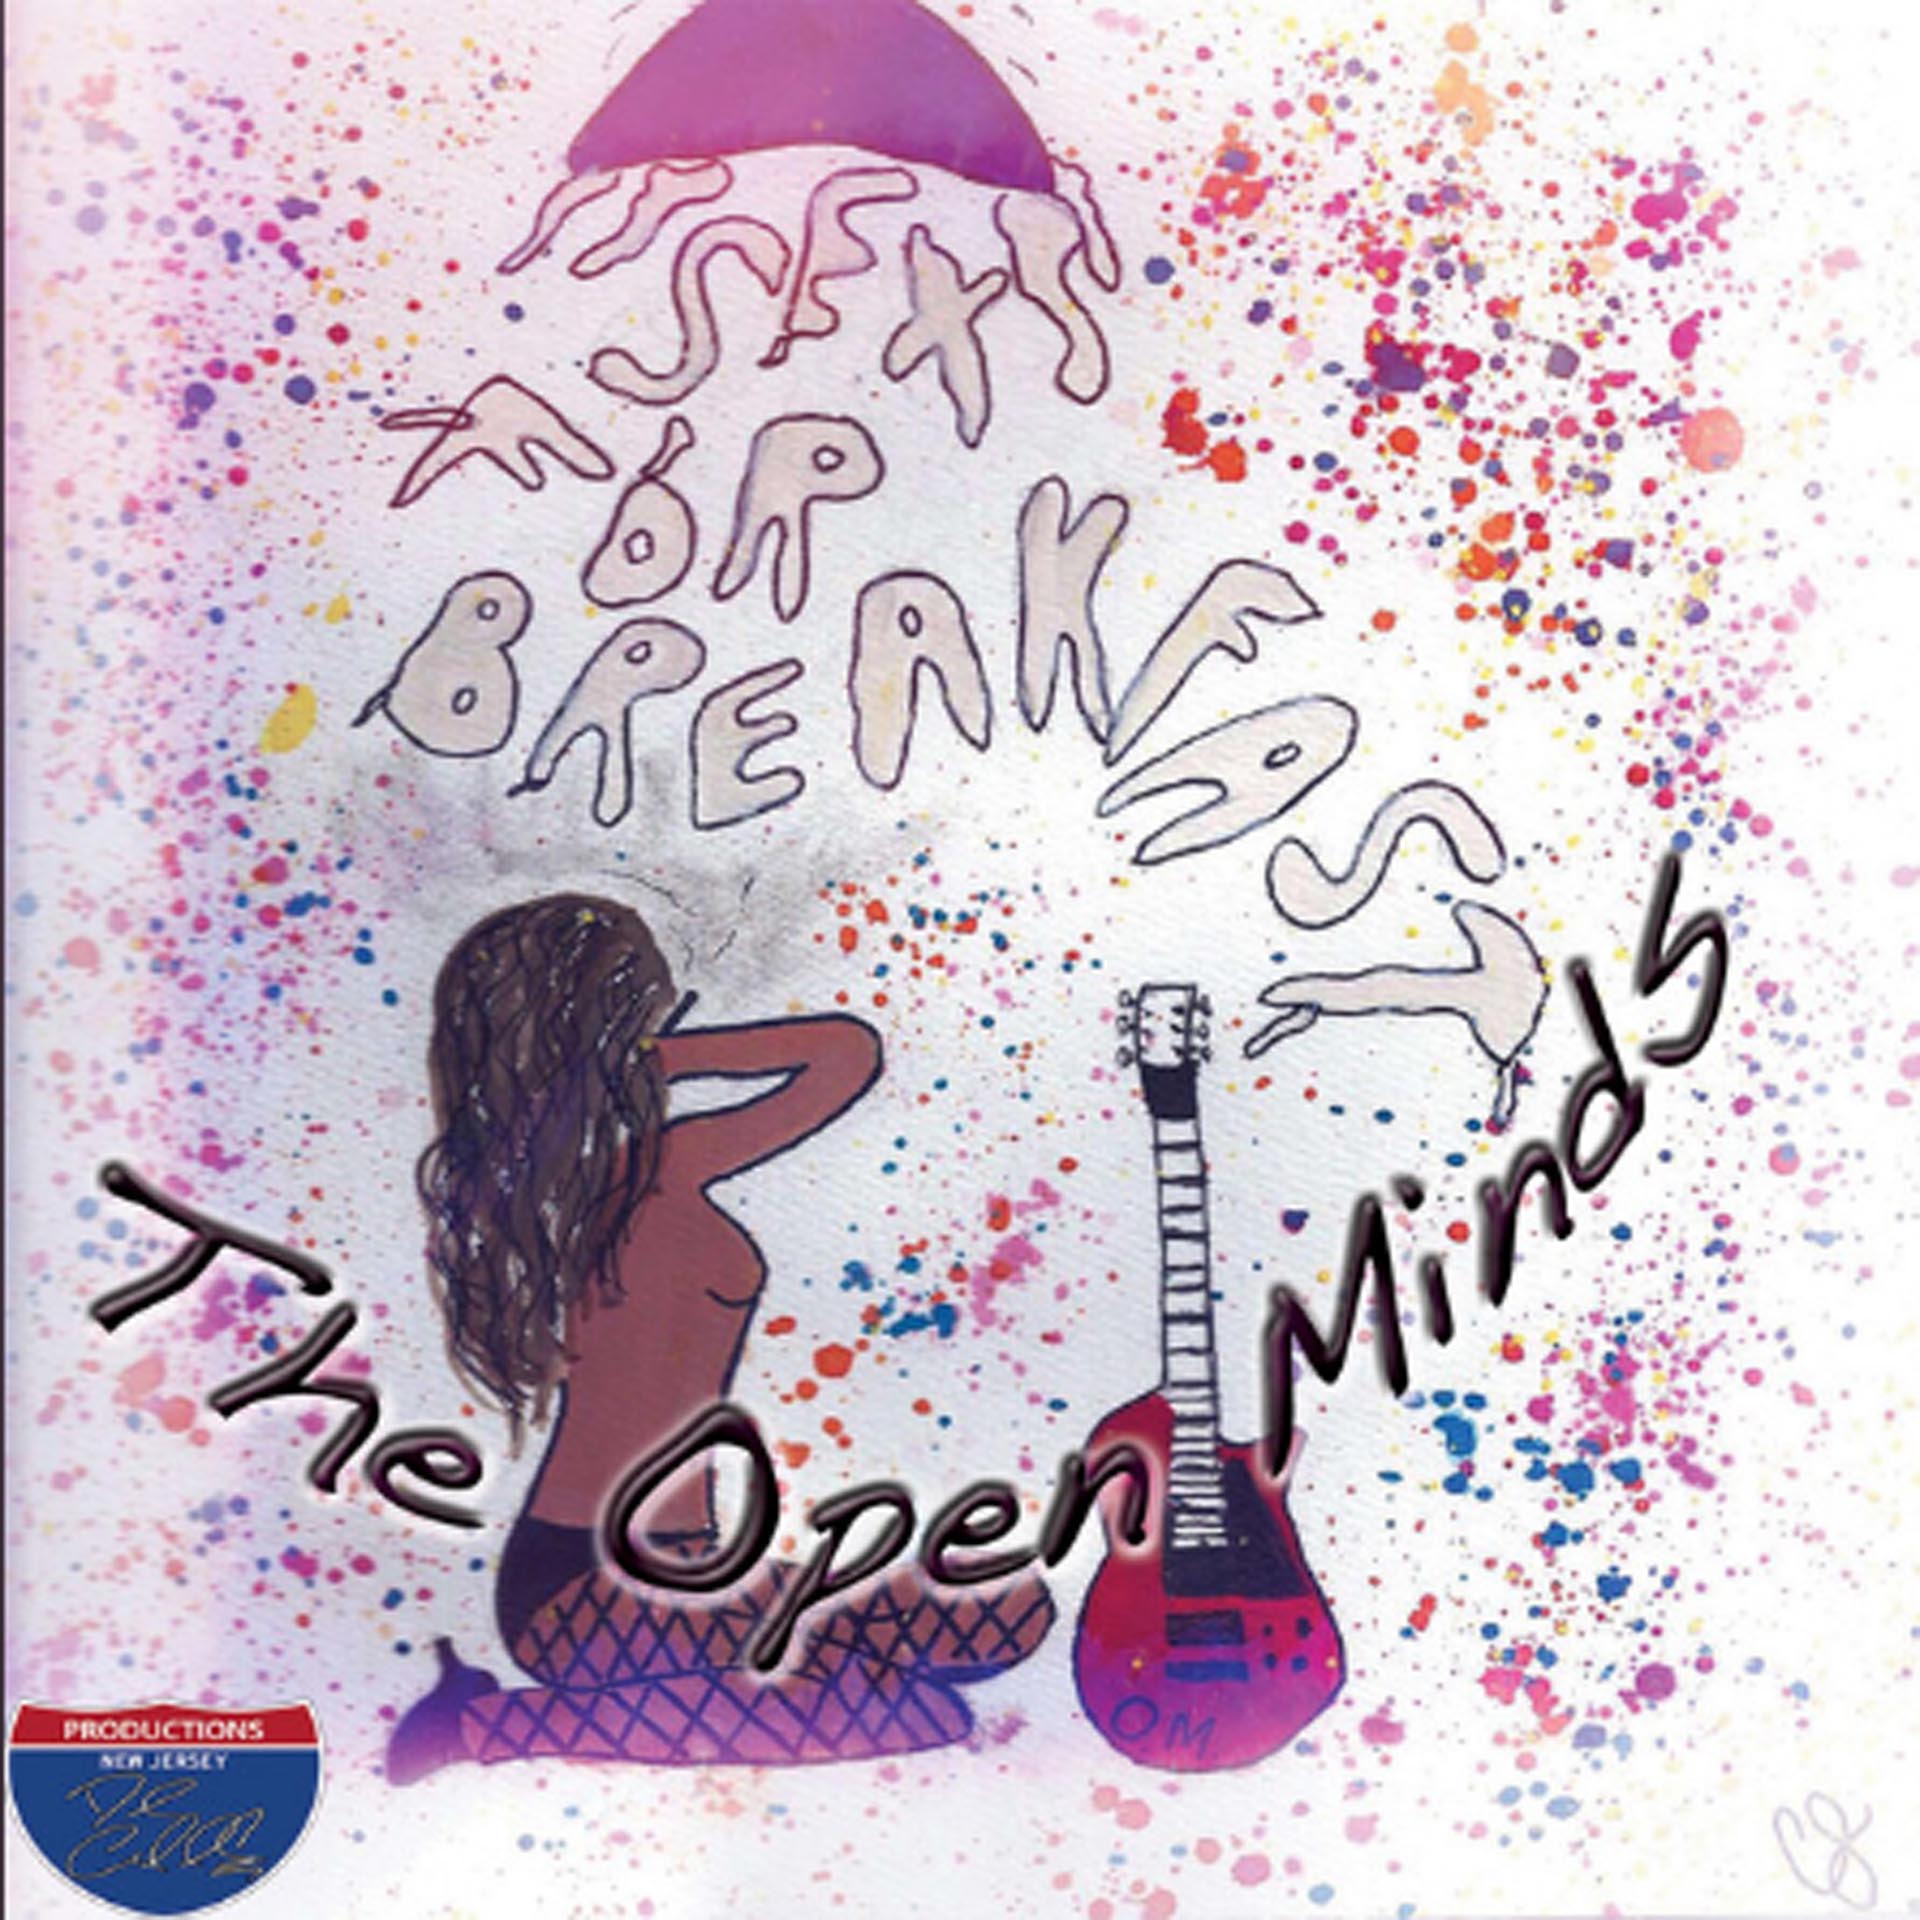 The Open Minds album cover.jpg